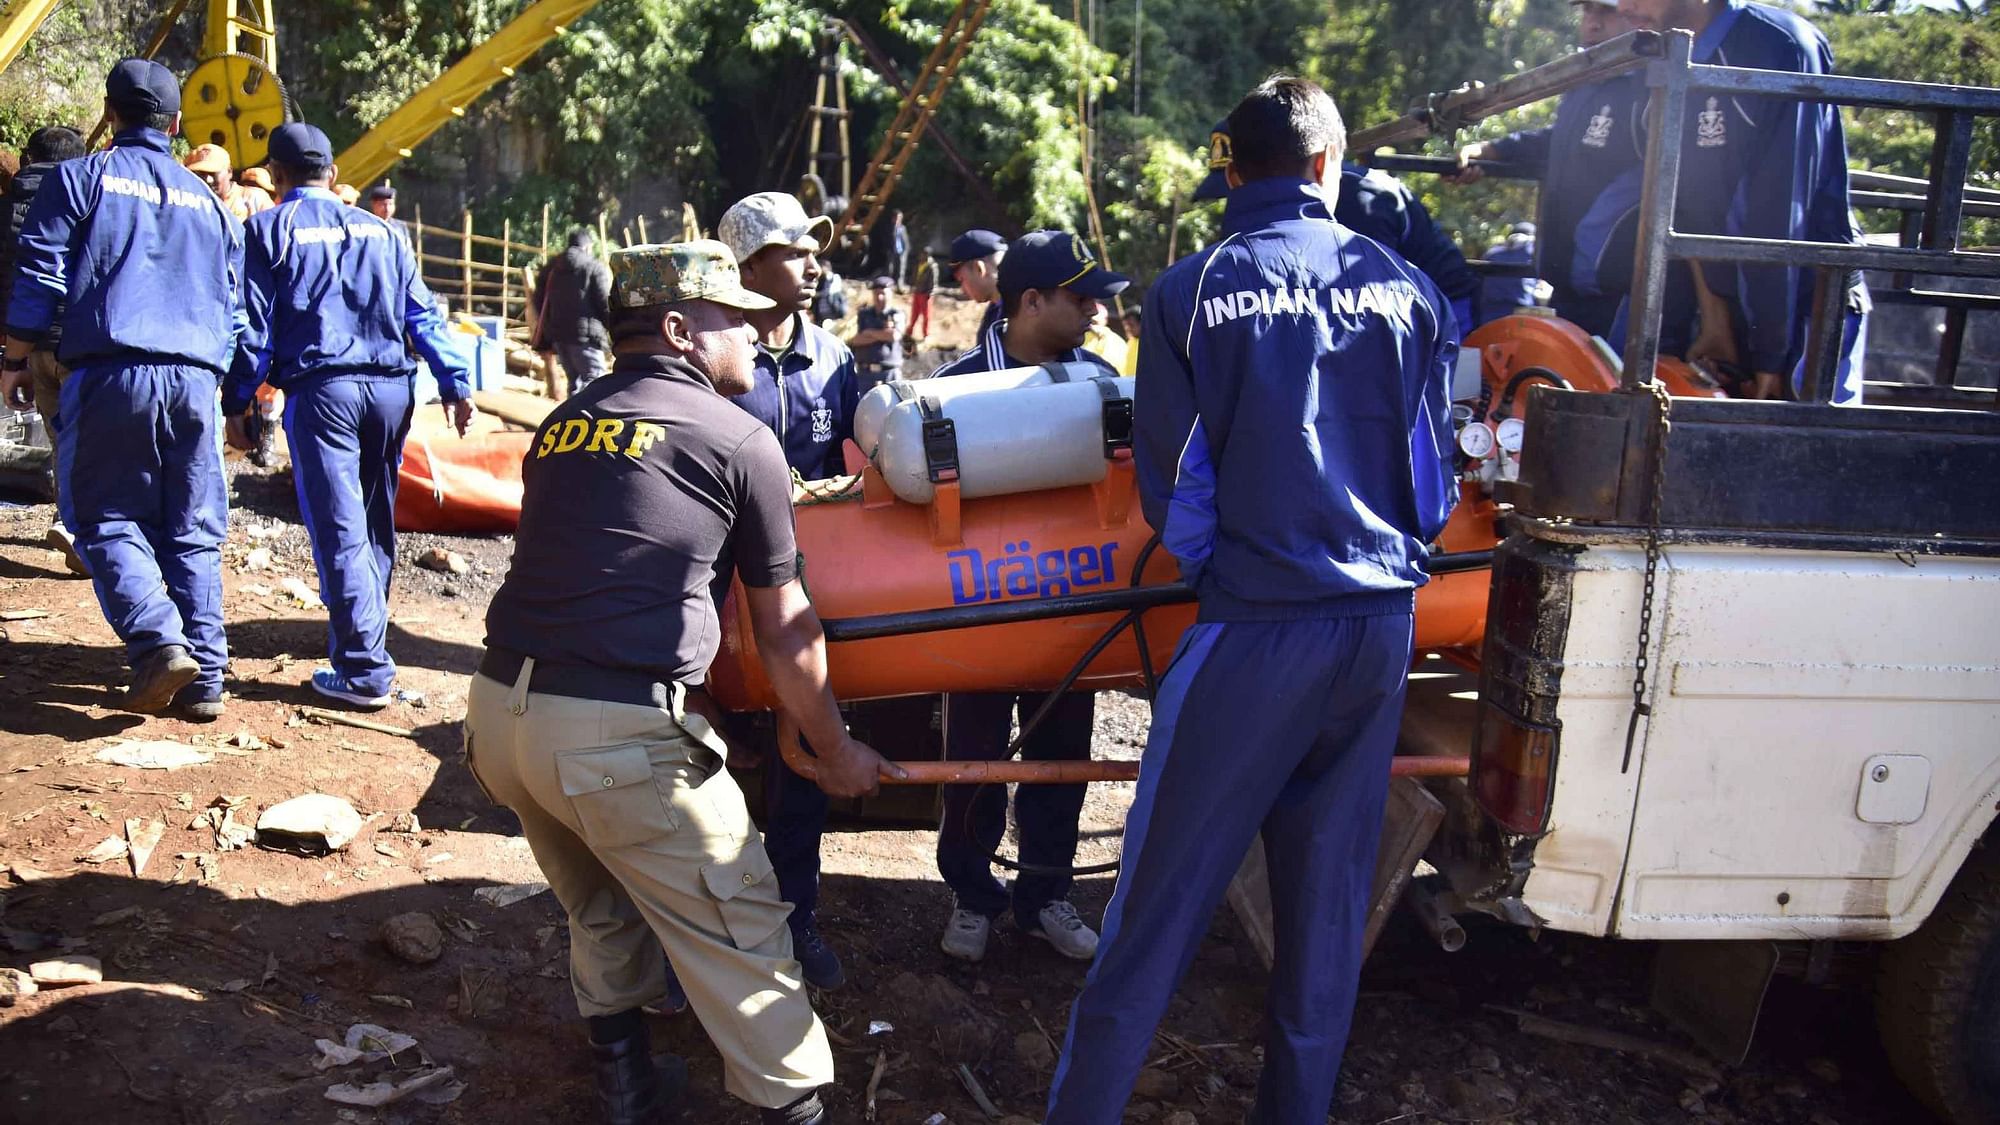 A team of 11 Navy divers with their equipment deployed at the site of a coal mine collapse at Ksan, in Jaintia Hills district of Meghalaya on Sunday, 30 December.